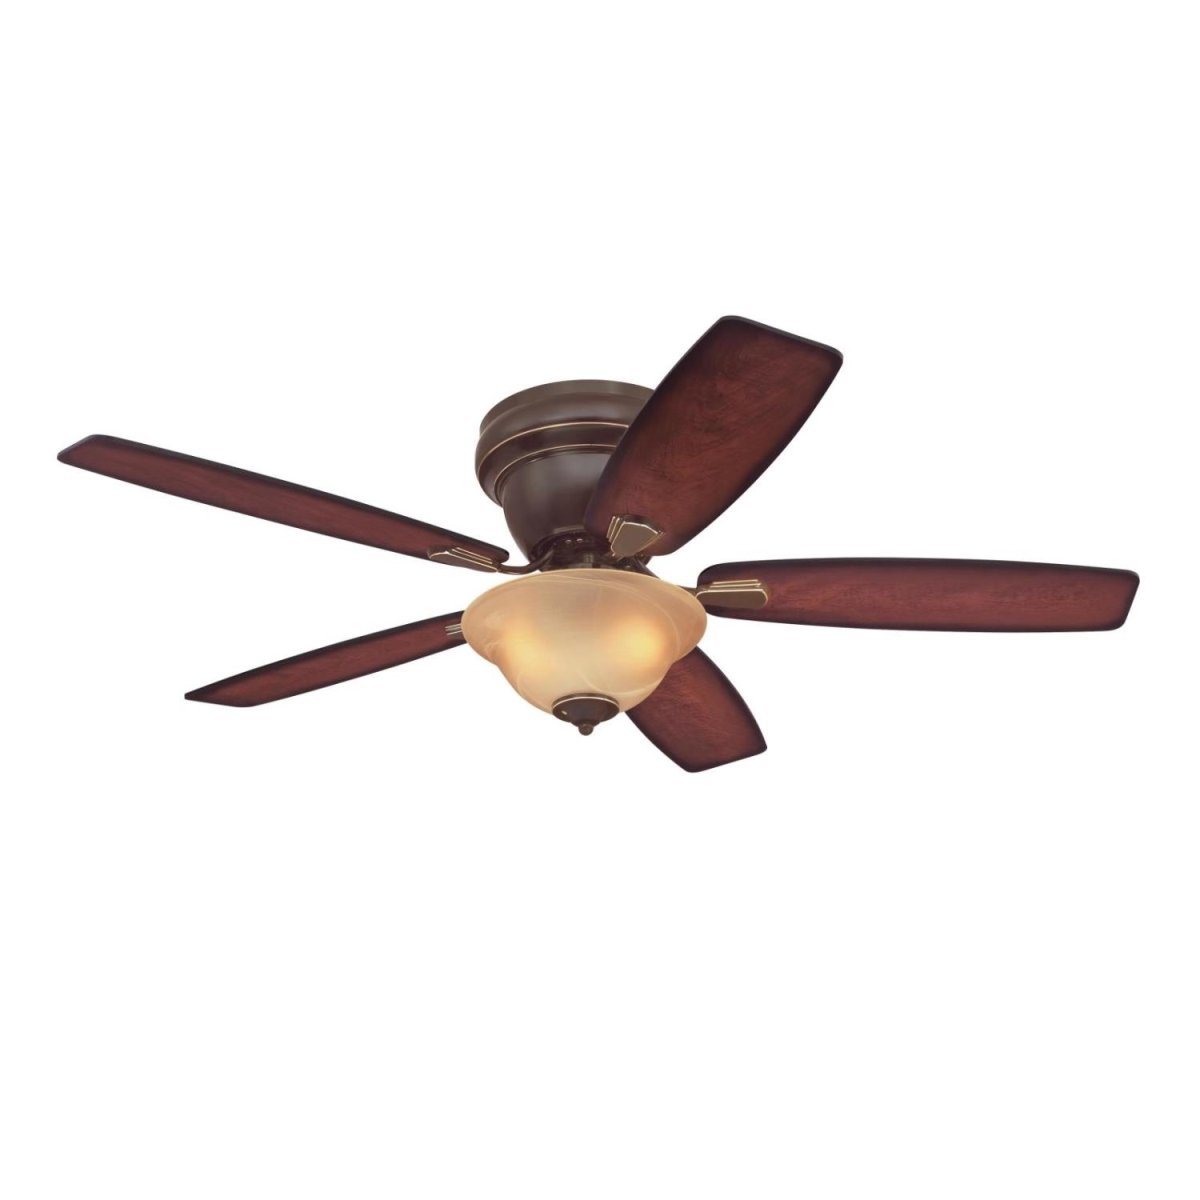 52 In. Ceiling Fan With Led Light Fixture Classic Bronze Finish Reversible Blades Applewood With Shaded Edge & Dark Cherry Amber Alabaster Bowl